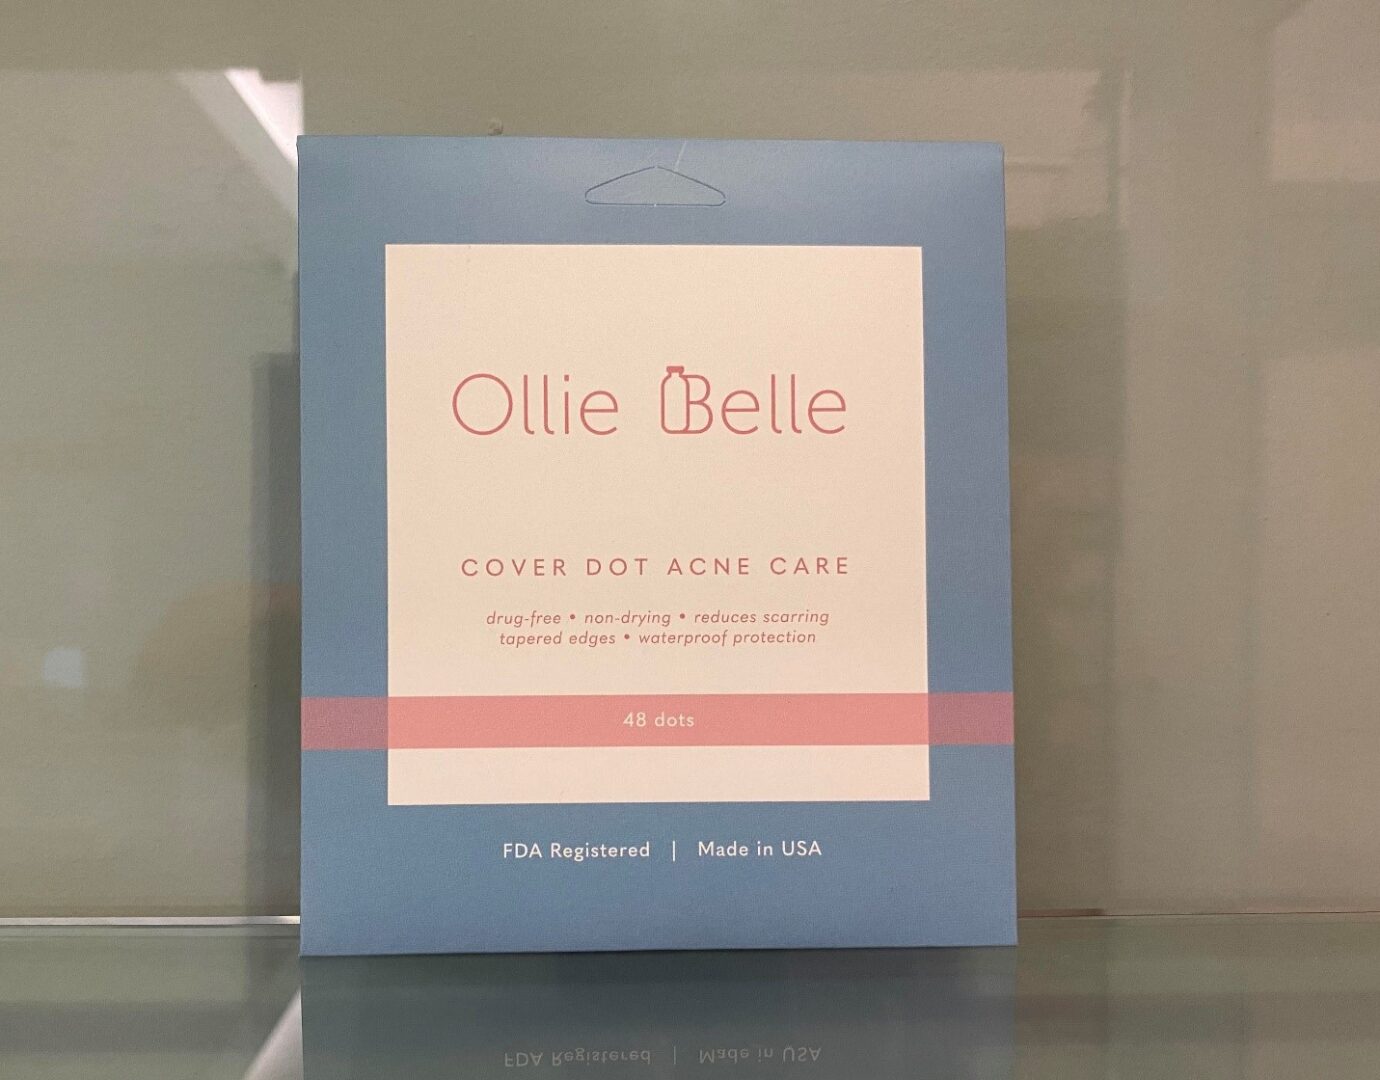 A box of ollie belle cover put home care